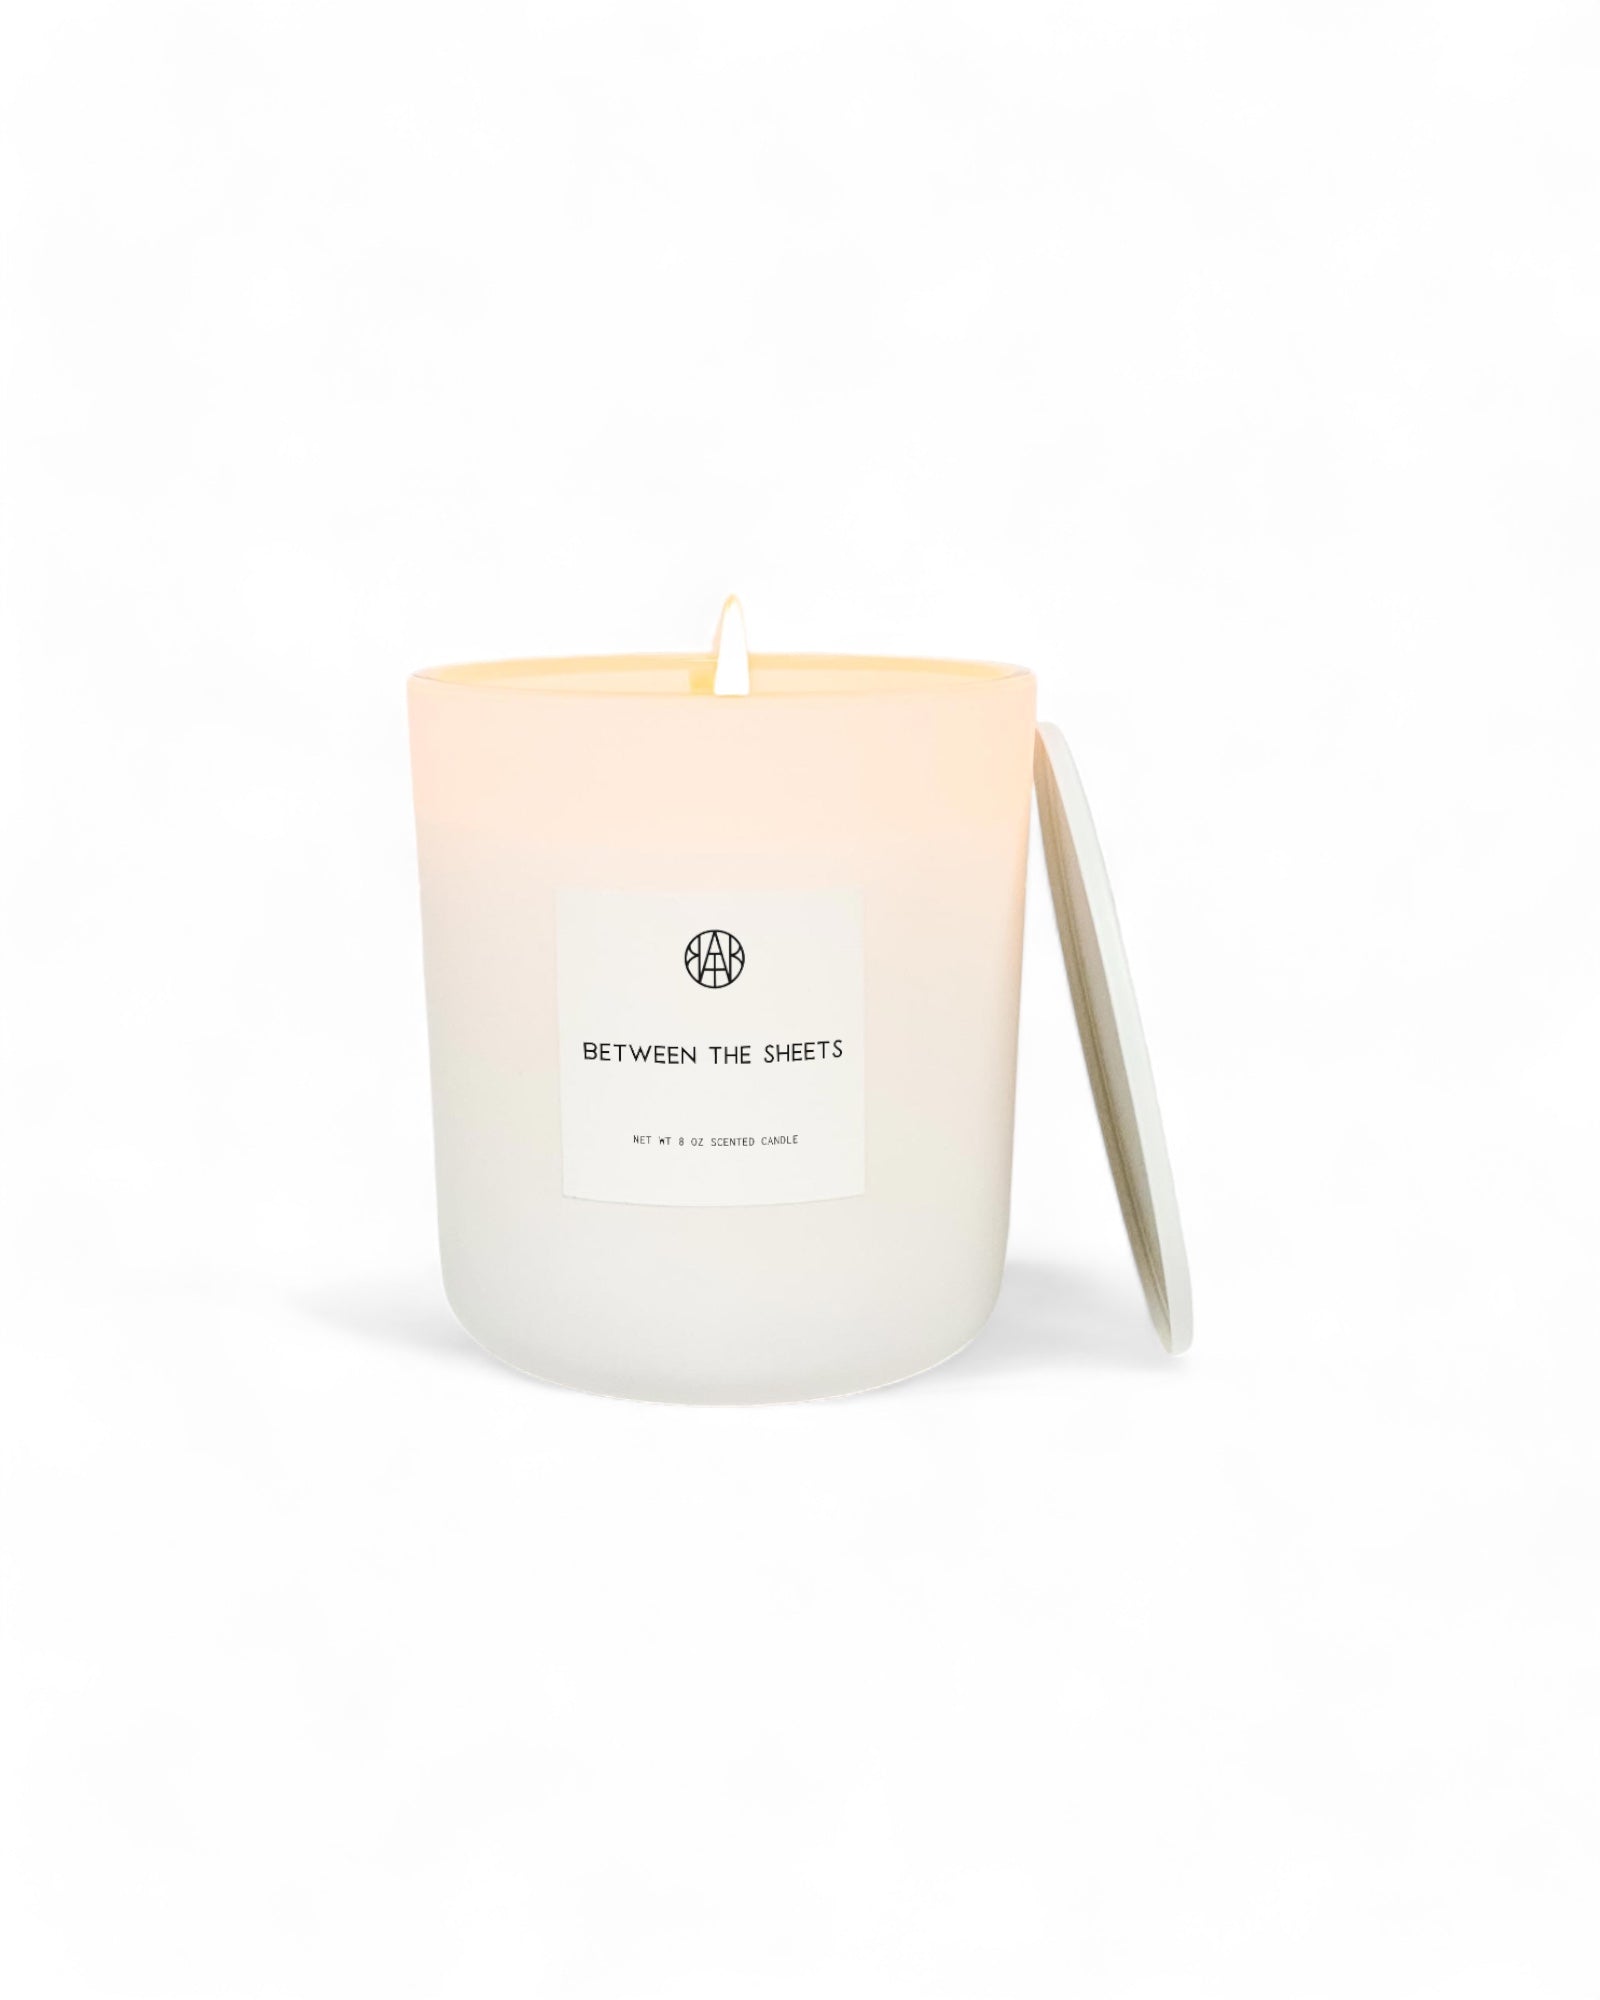 BETWEEN THE SHEETS - Classic Candle - AEMBR - Clean Luxury Candles, Wax Melts & Laundry Care